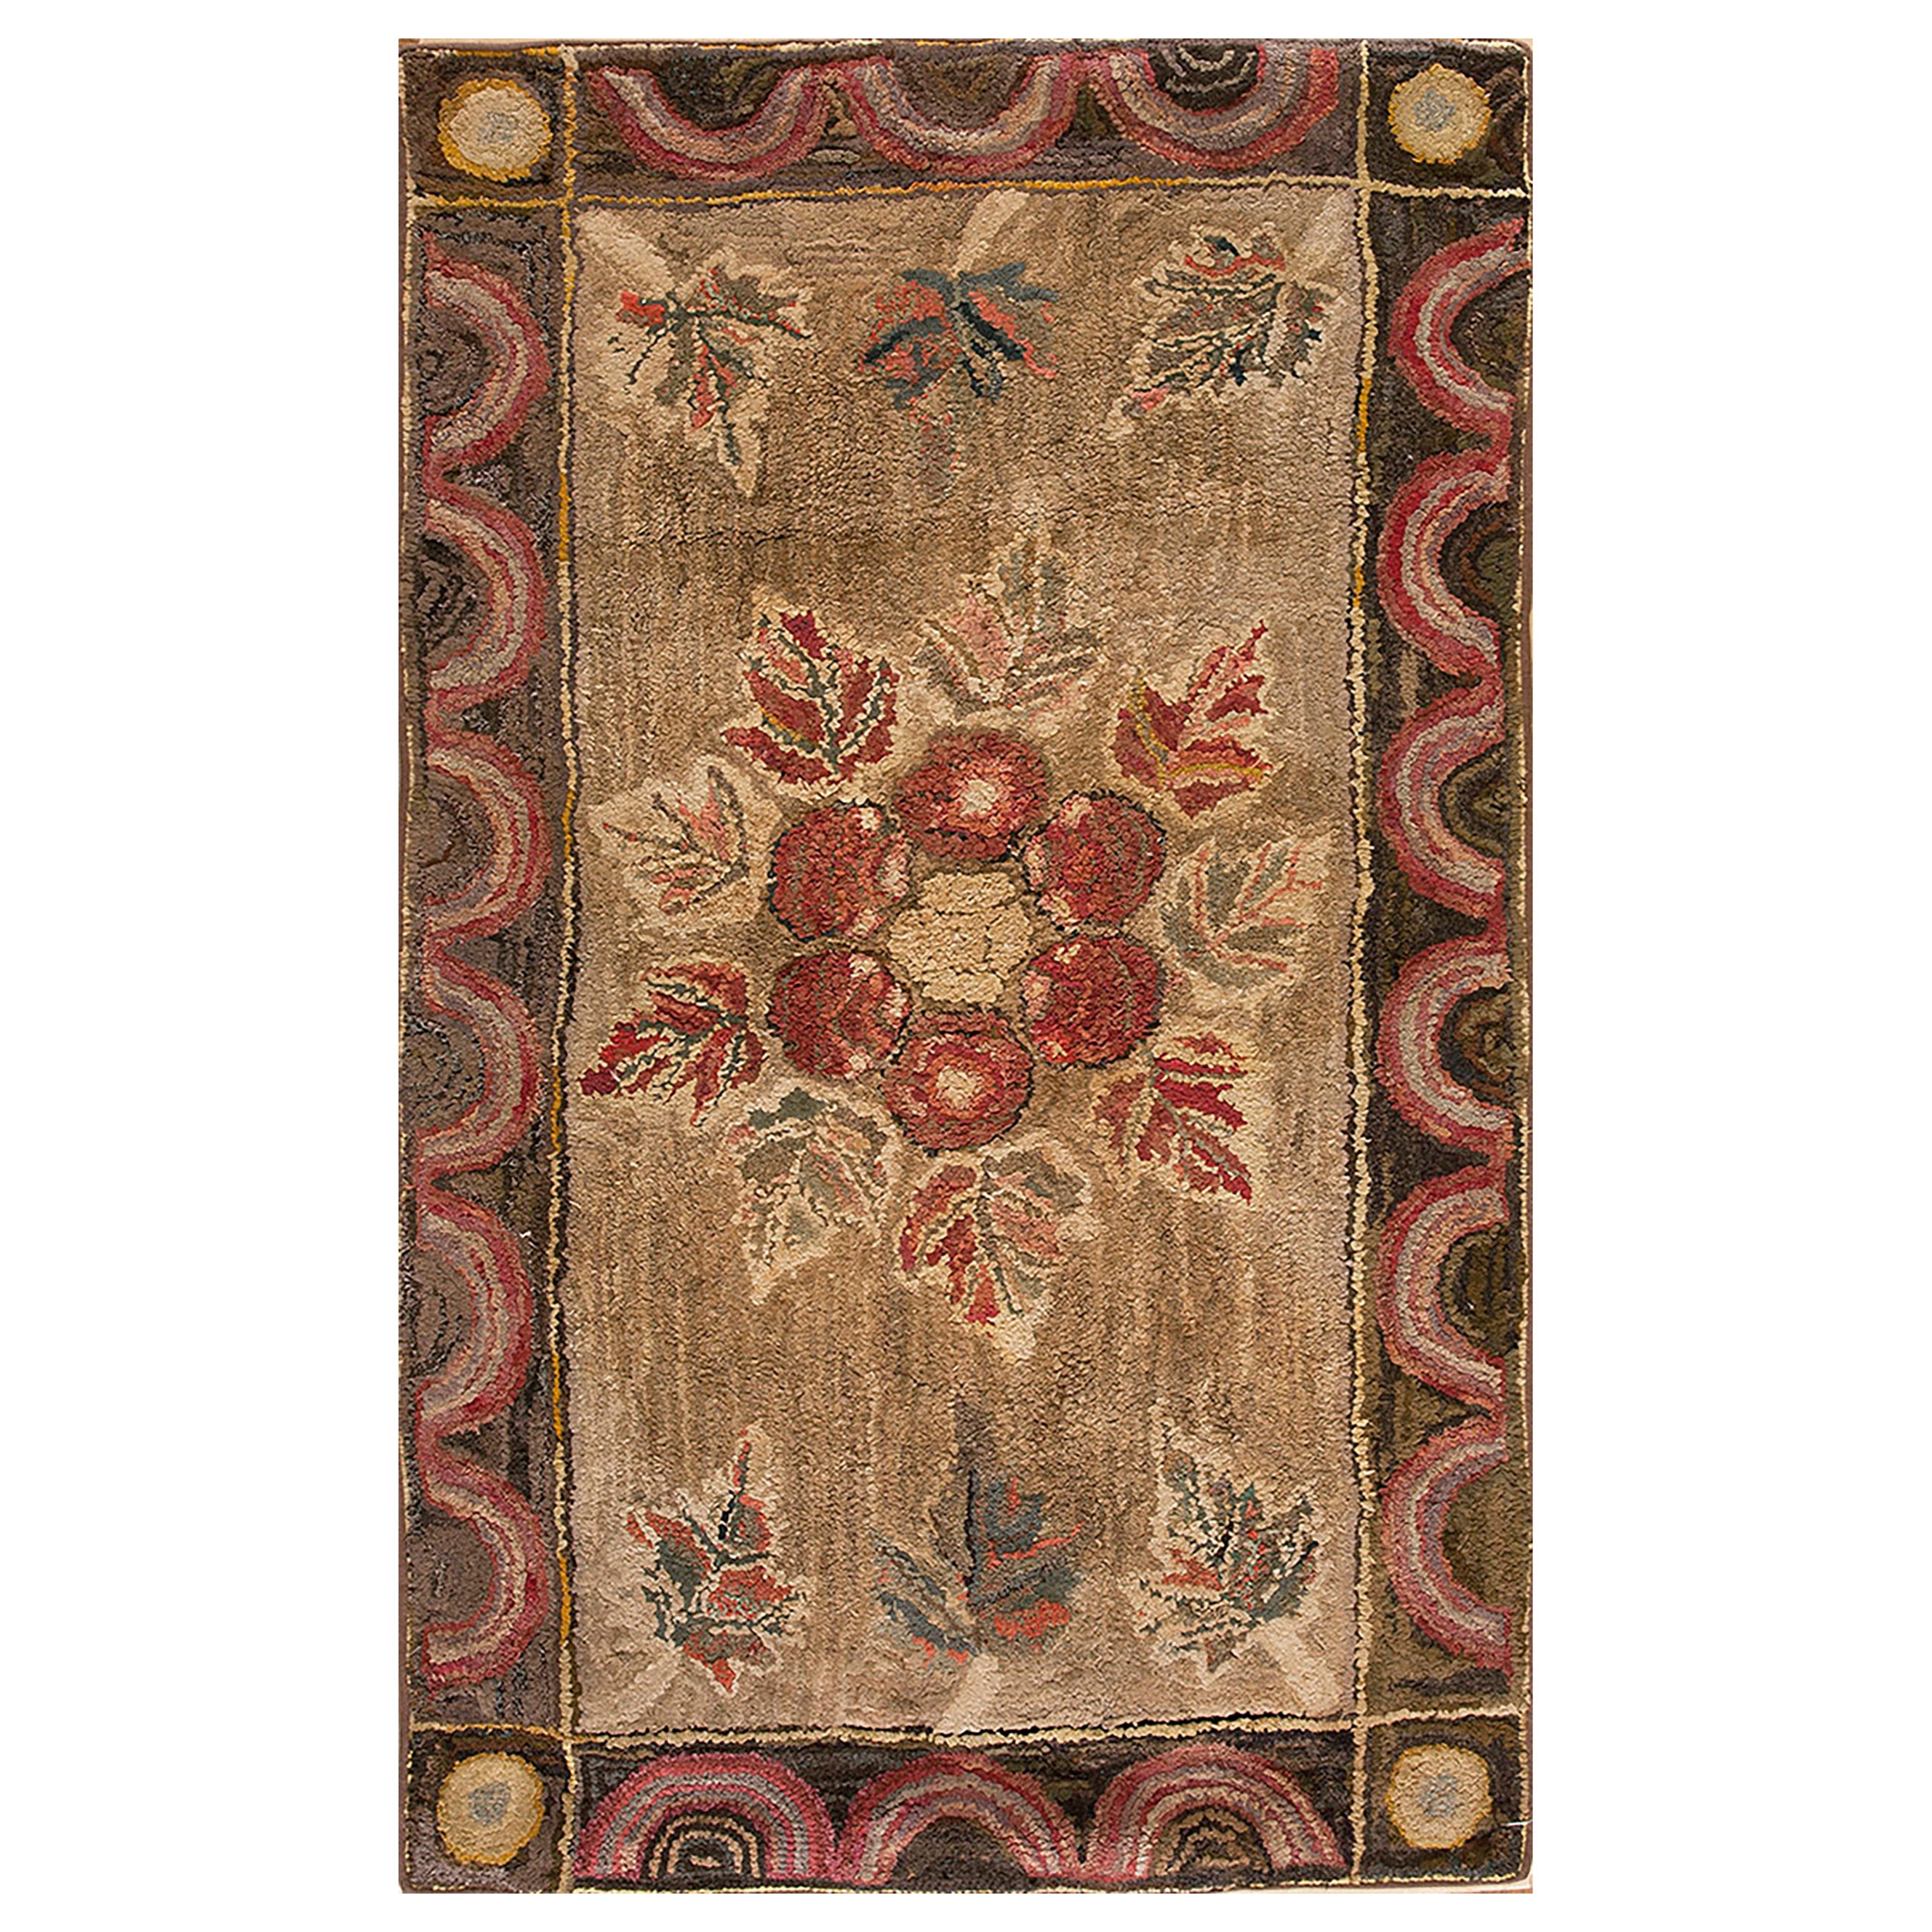  Early 20th Century American Hooked Rug 3' 2"x 5' 6" 